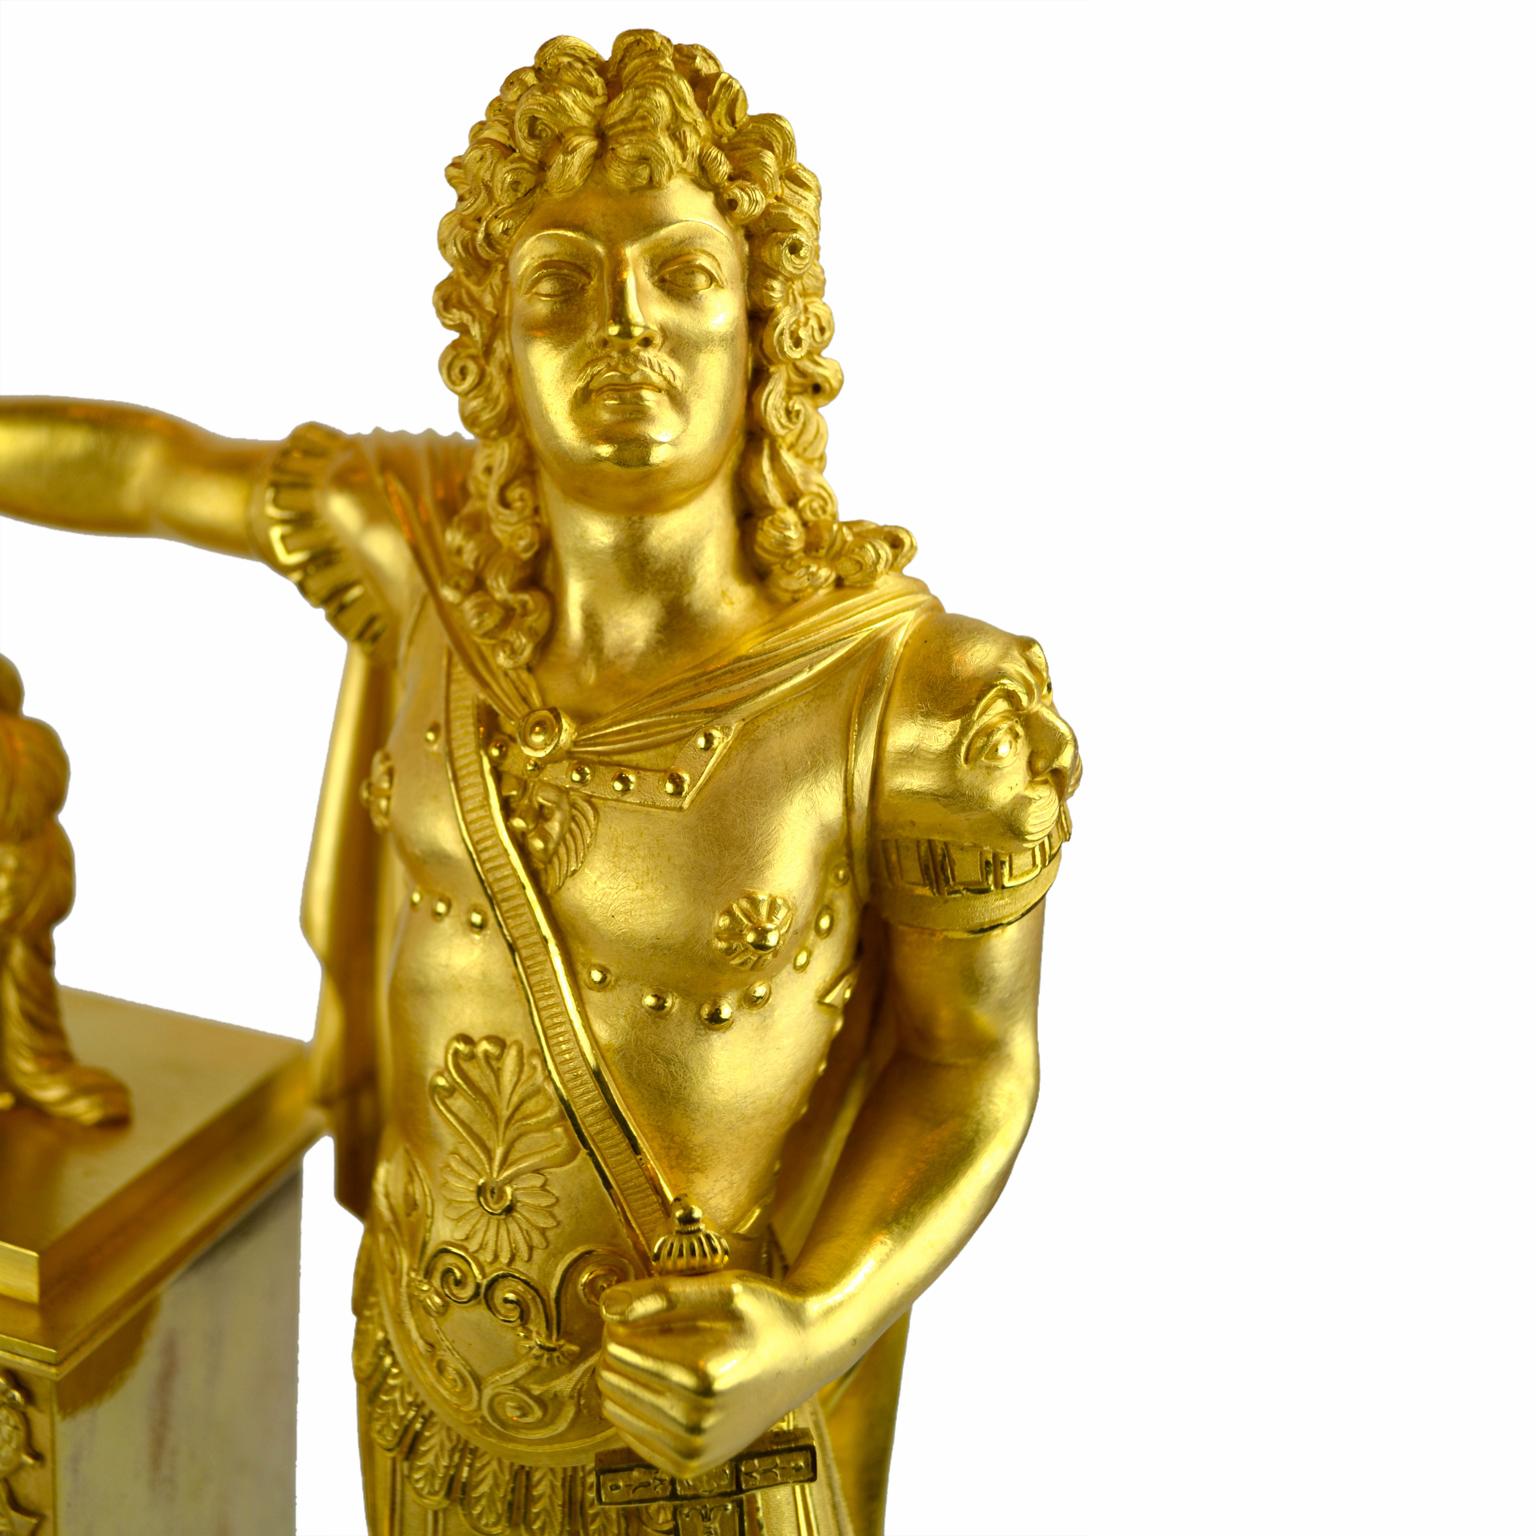 Gilt French Empire clock showing Louis XVI dressed as Caesar For Sale